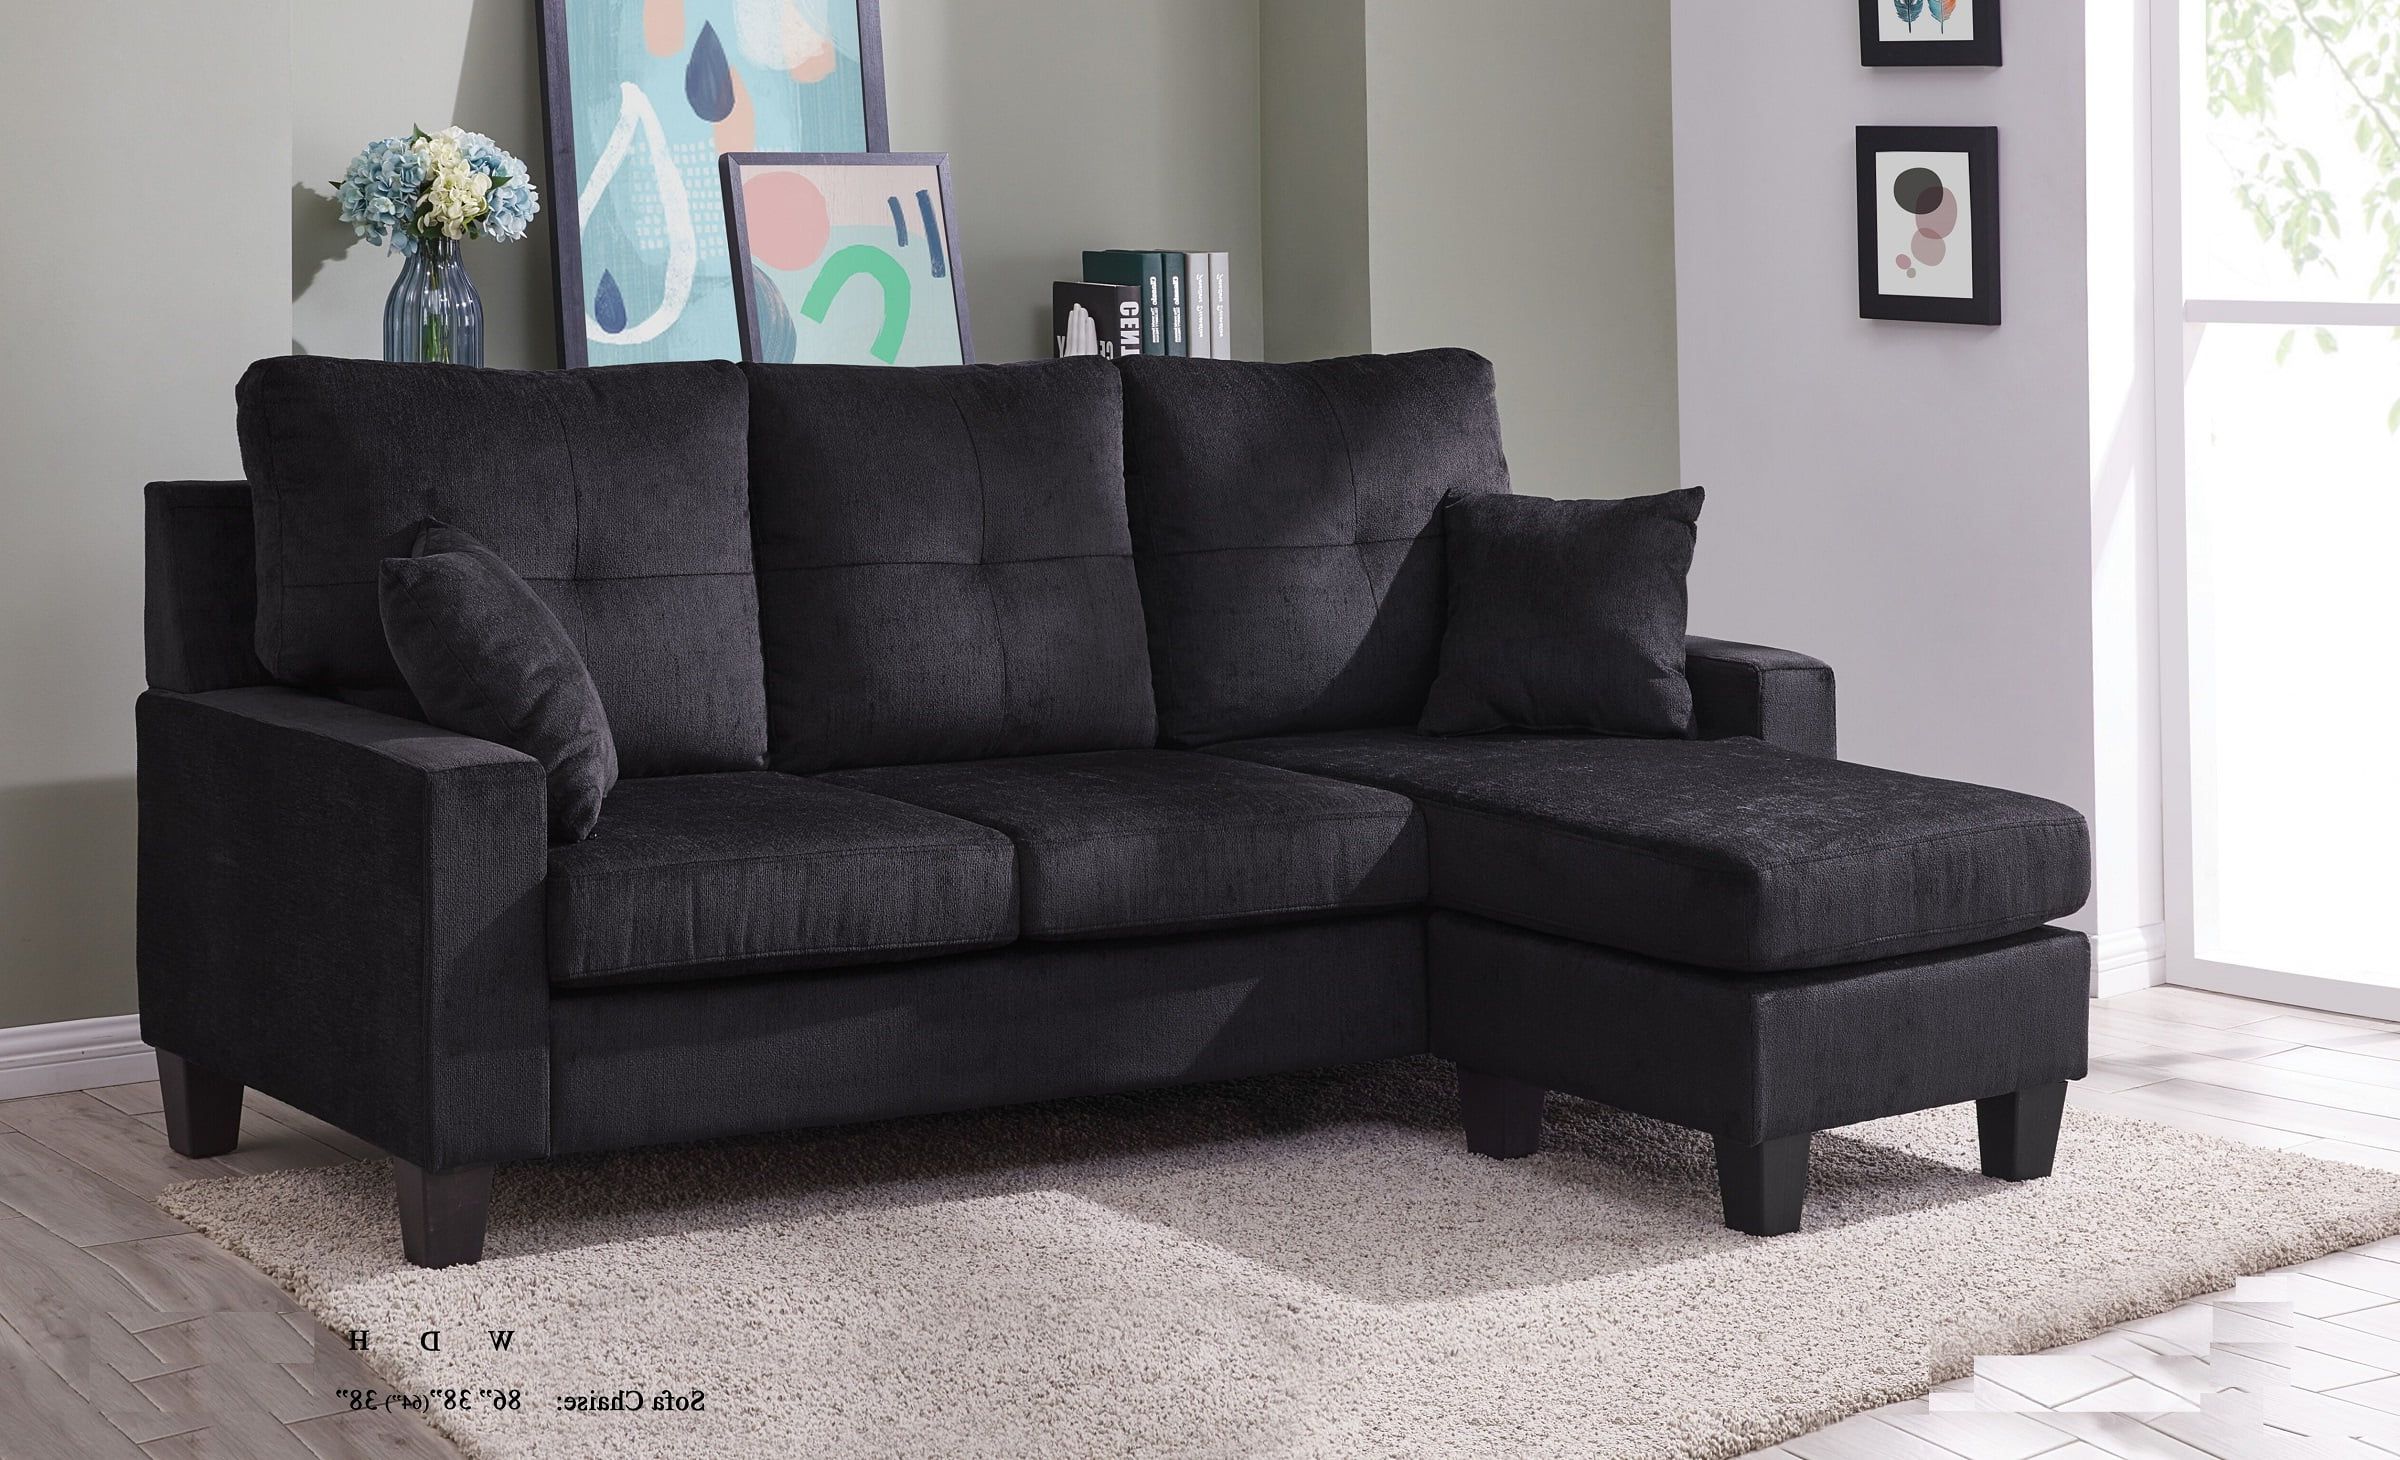 Sectional Sofa Set Black Fabric Tufted Cushion Sofa Chaise Small Space With Regard To Traditional Black Fabric Sofas (View 16 of 20)